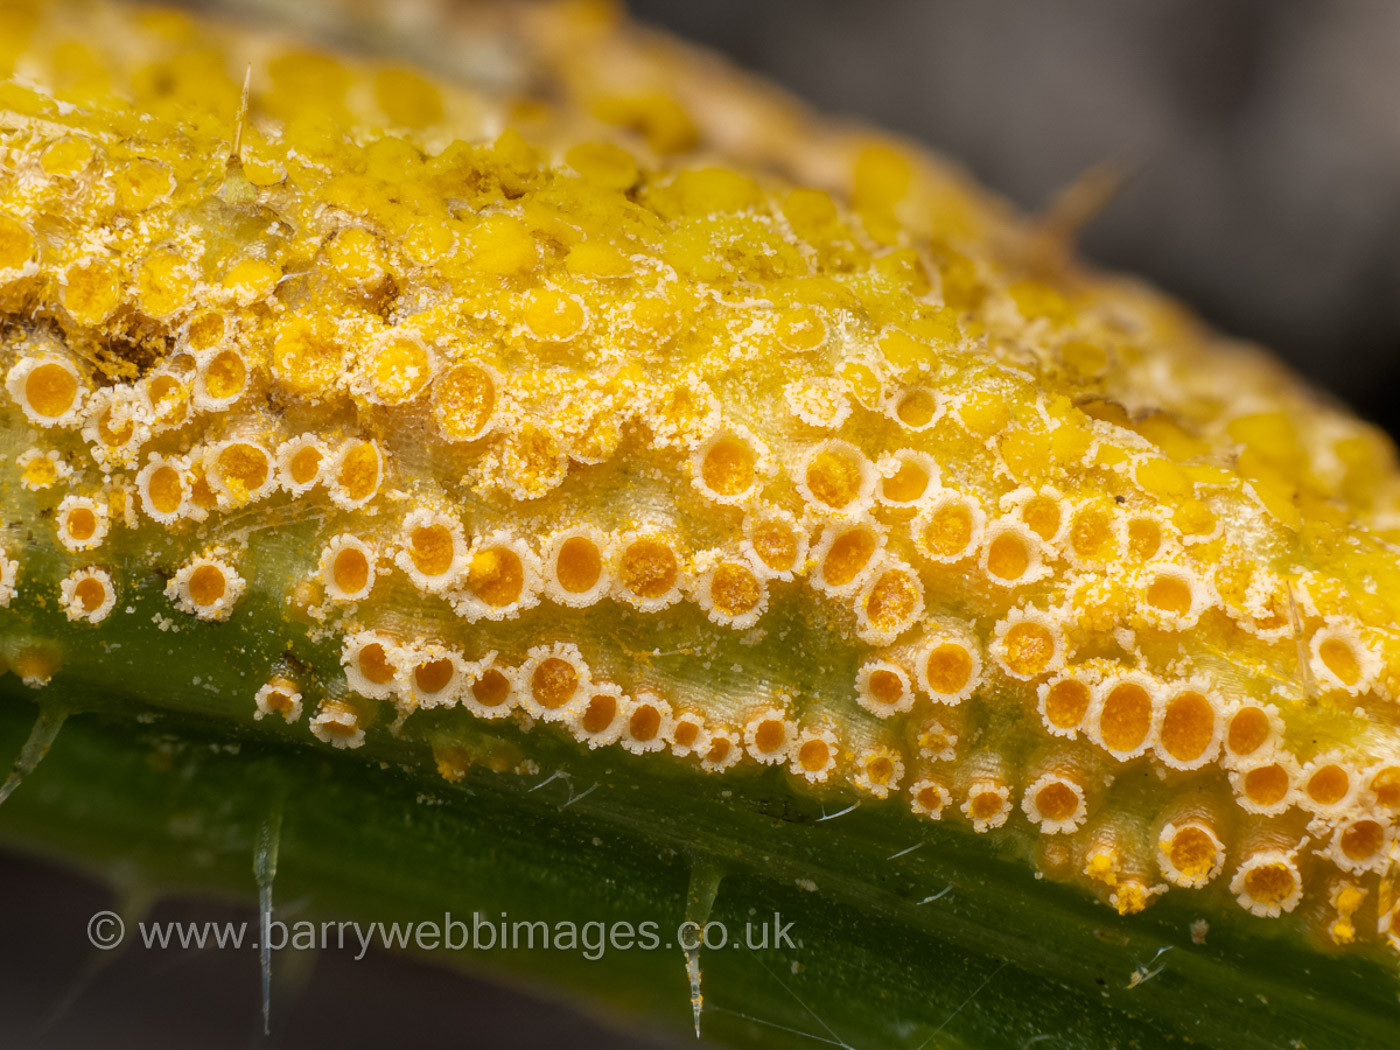 Puccinia urticata  by Barry Webb